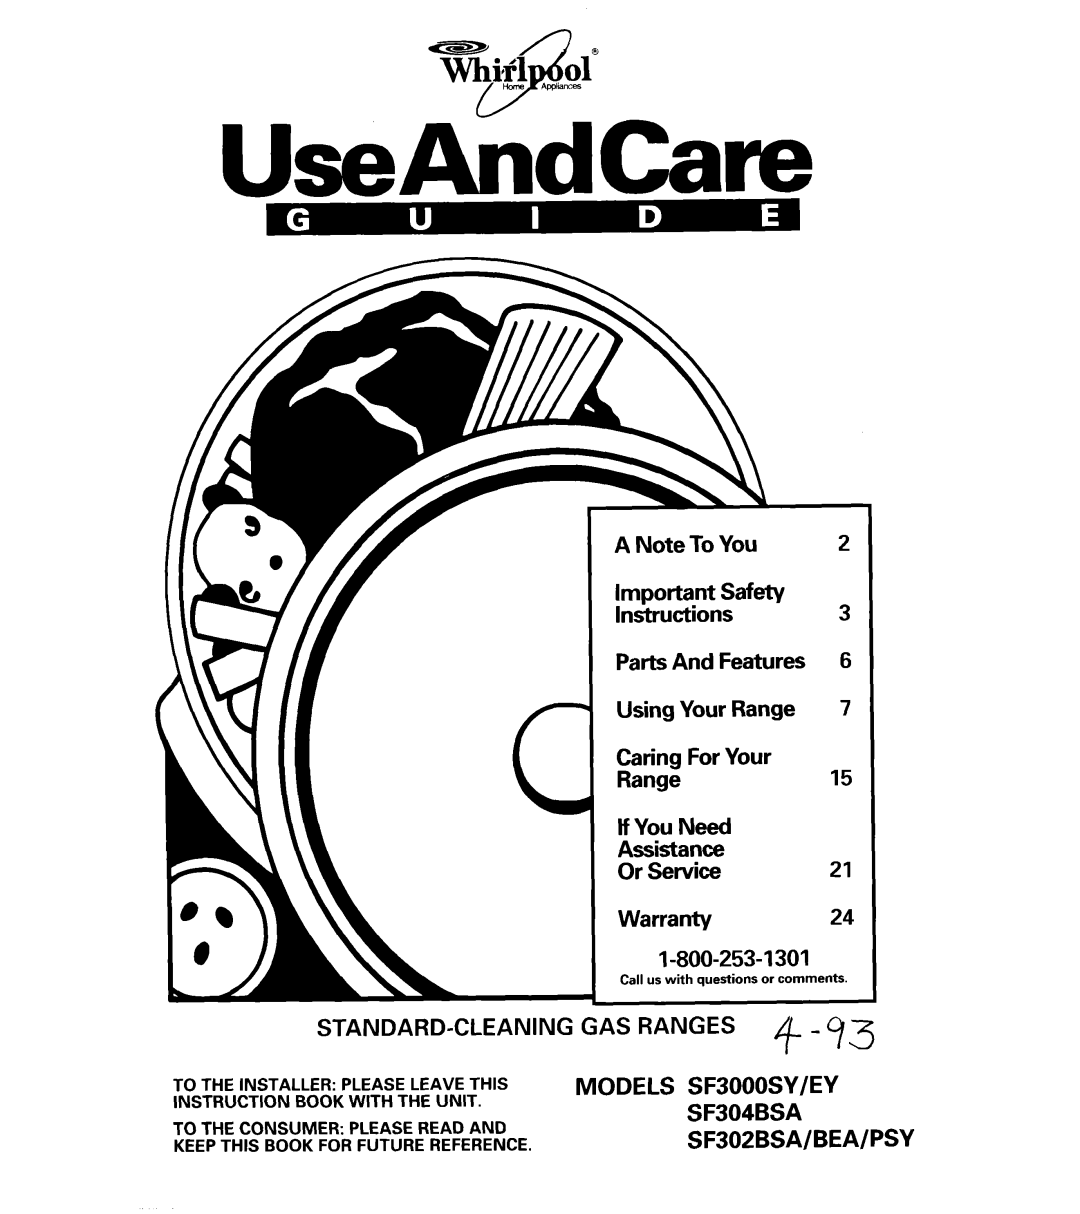 Whirlpool SF3000EY, SF302BEA manual SF304BSA SF302BSA/BEA/PSY, Standard-Cleaning, A Note To You, Warranty24, UseAhdCare 